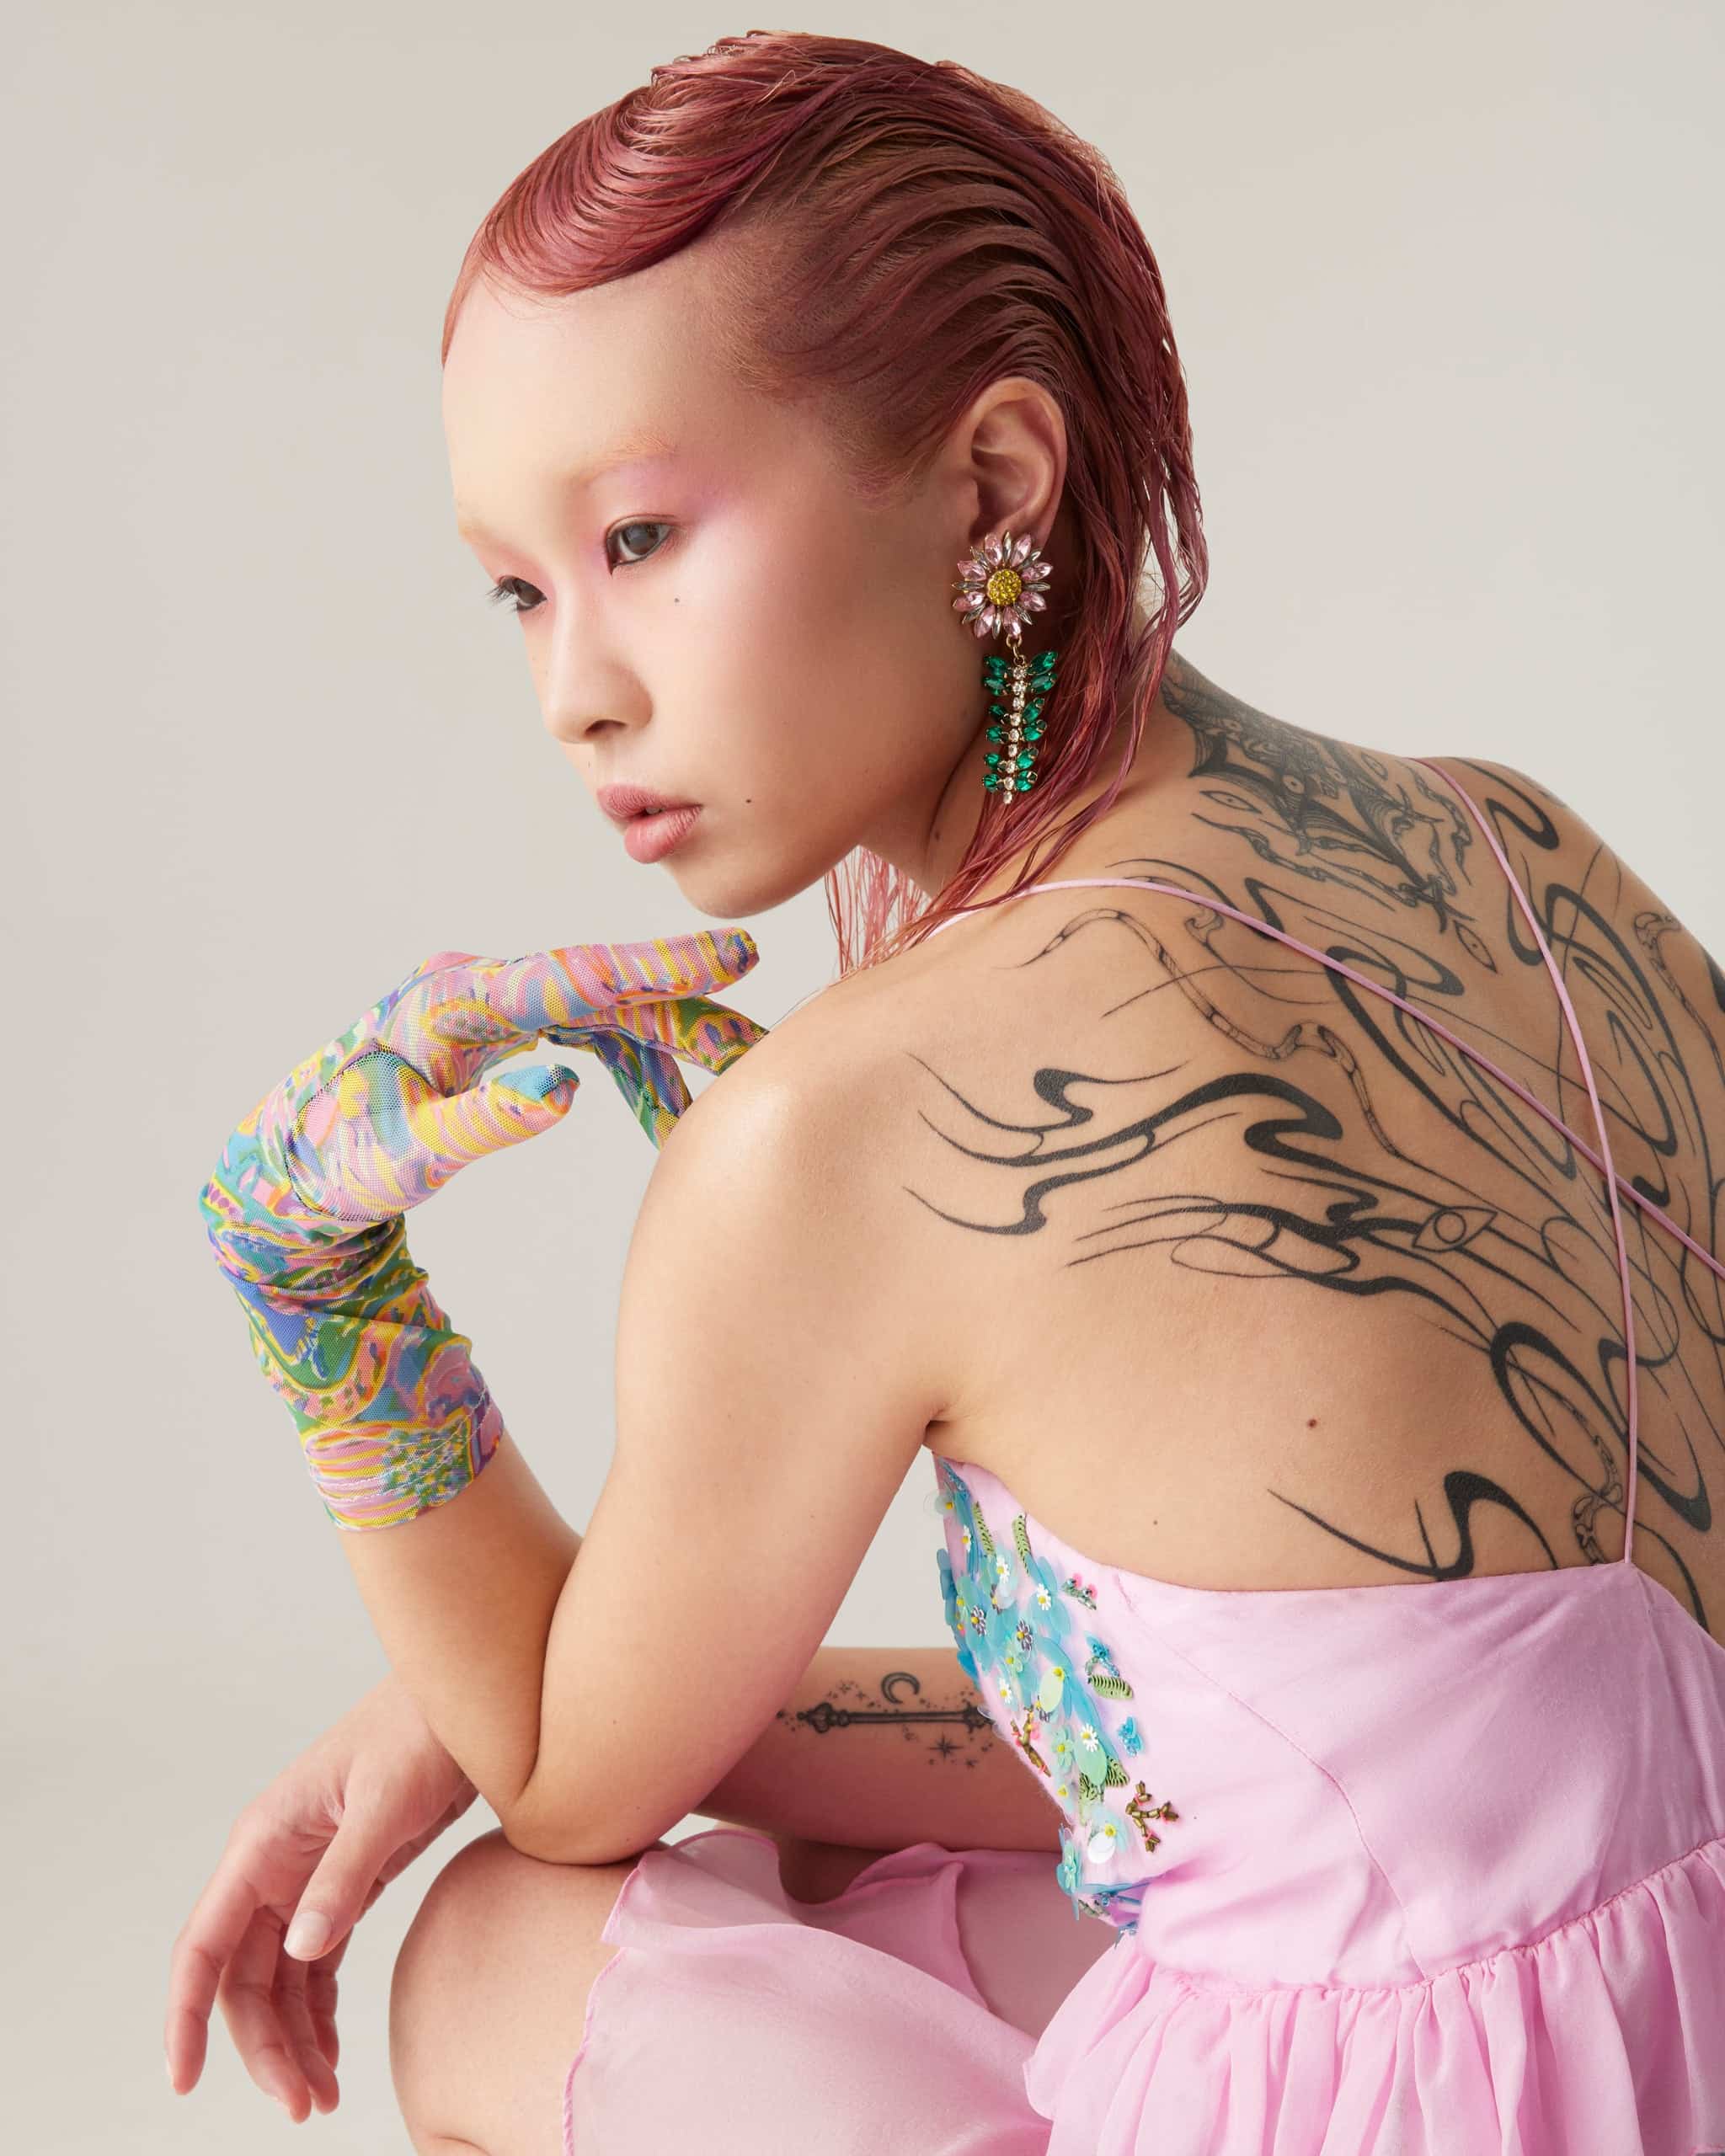 A female model with slicked-back mid-length pink hair crouching down, wearing a pink Romance was Born dress and multi-coloured gloves. She has a large tattoo of wavy black lines covering her back.